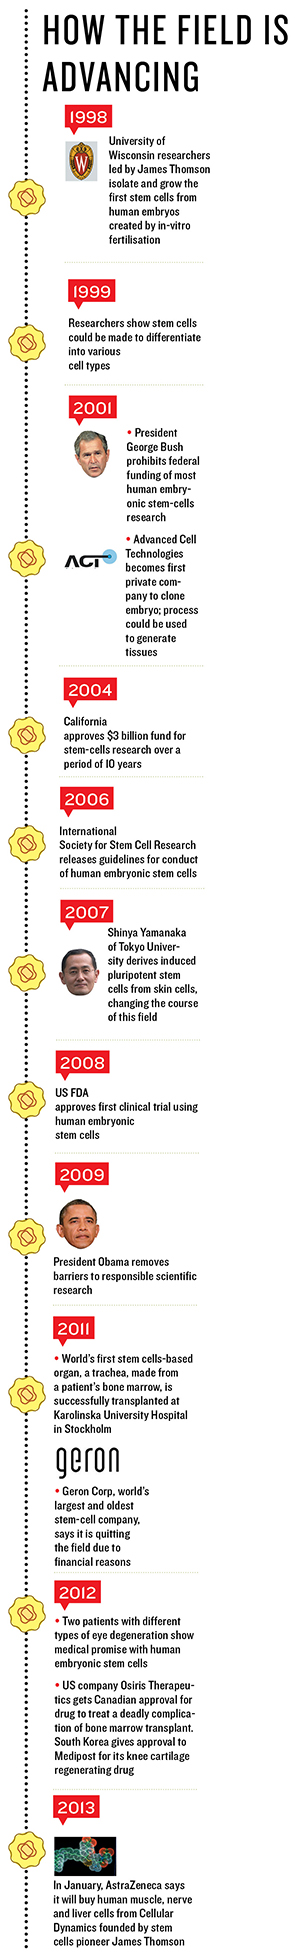 Stem Cells Industry: The Battle Within